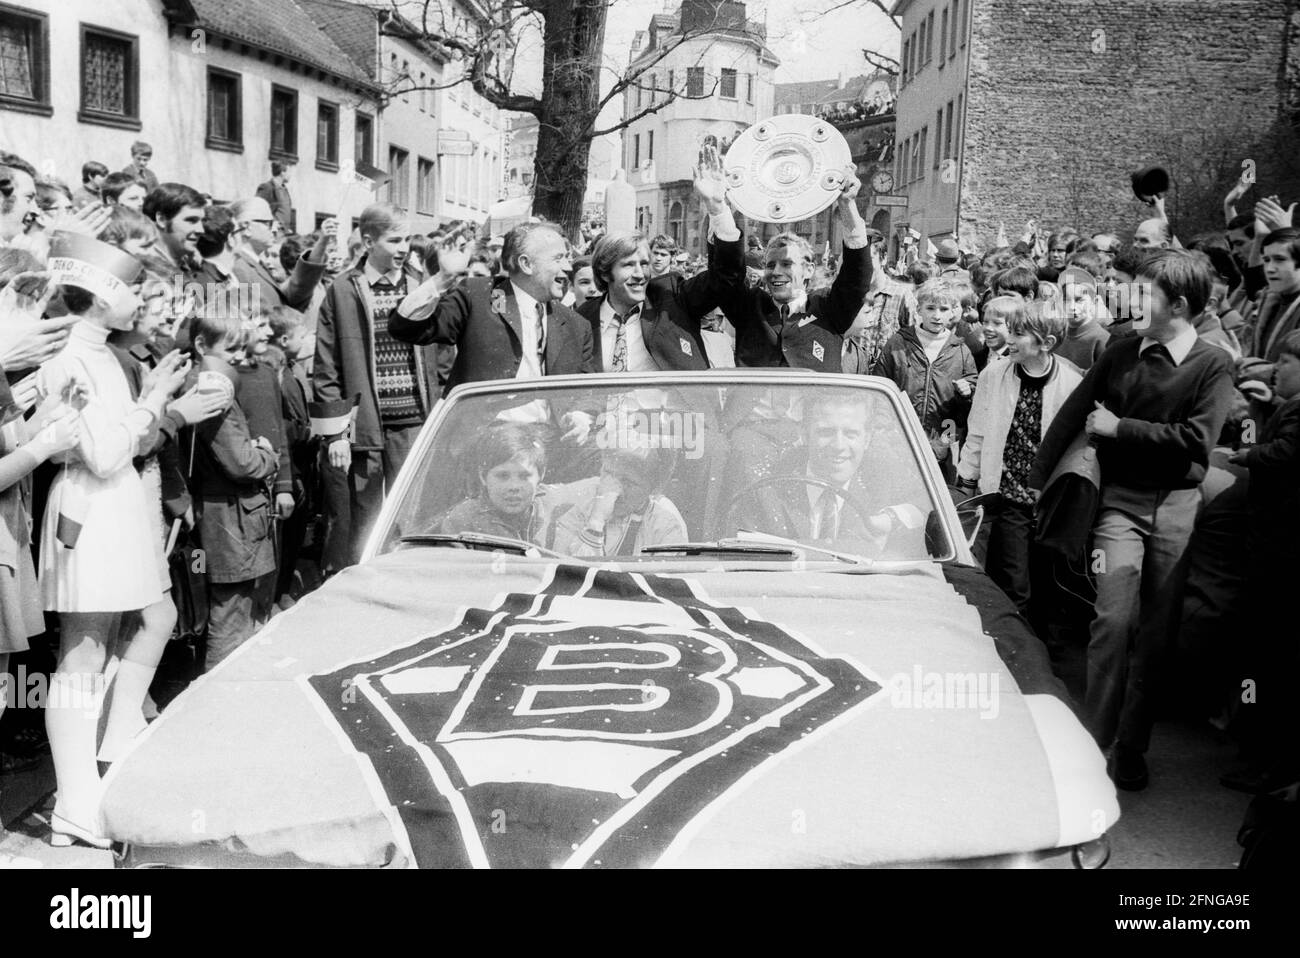 VFL Borussia Mönchengladbach German Football Champion 1969/70 during the drive through the city in the front of the car from the left coach Hennes Weisweiler, Günter Netzer and Berti Vogts with championship trophy.the motorcade is accompanied by many fans [automated translation] Stock Photo